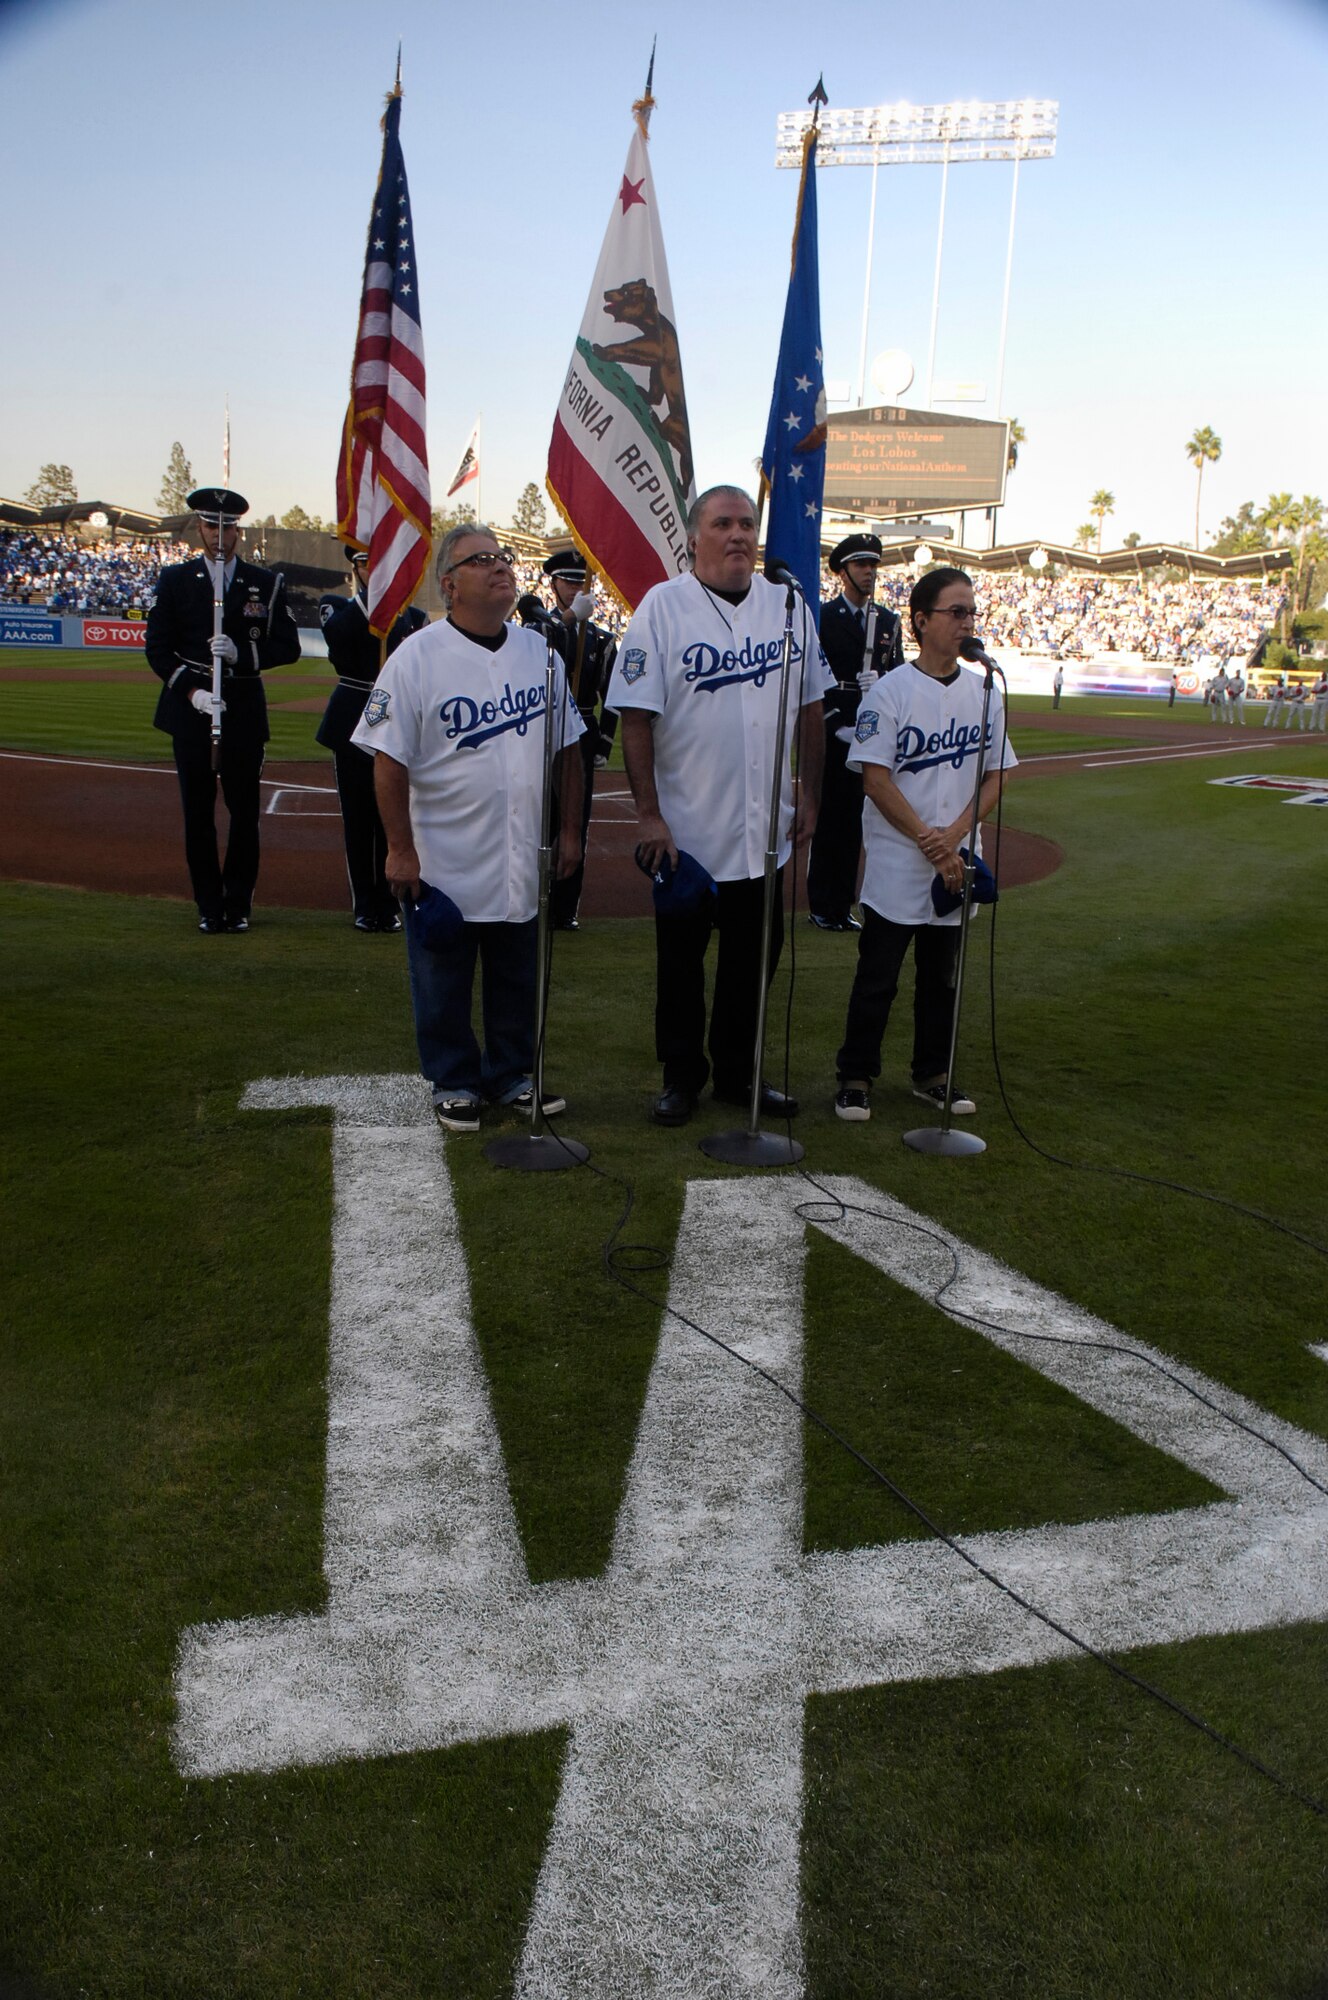 VANDENBERG AIR FORCE BASE, Calif.-- Three-time grammy award winning artists Los Lobosperform the National Anthem as members of the Vandenberg Honor Guard present the colors during the opening ceremony at Game 4 of the National League Championship Series. The Los Angeles Dodgers were defeated 7-5 by the Philadelphia Phillies at Dodger Stadium, Oct. 13. (U.S. Air Force Photo/Staff Sgt. Vanessa Valentine) 